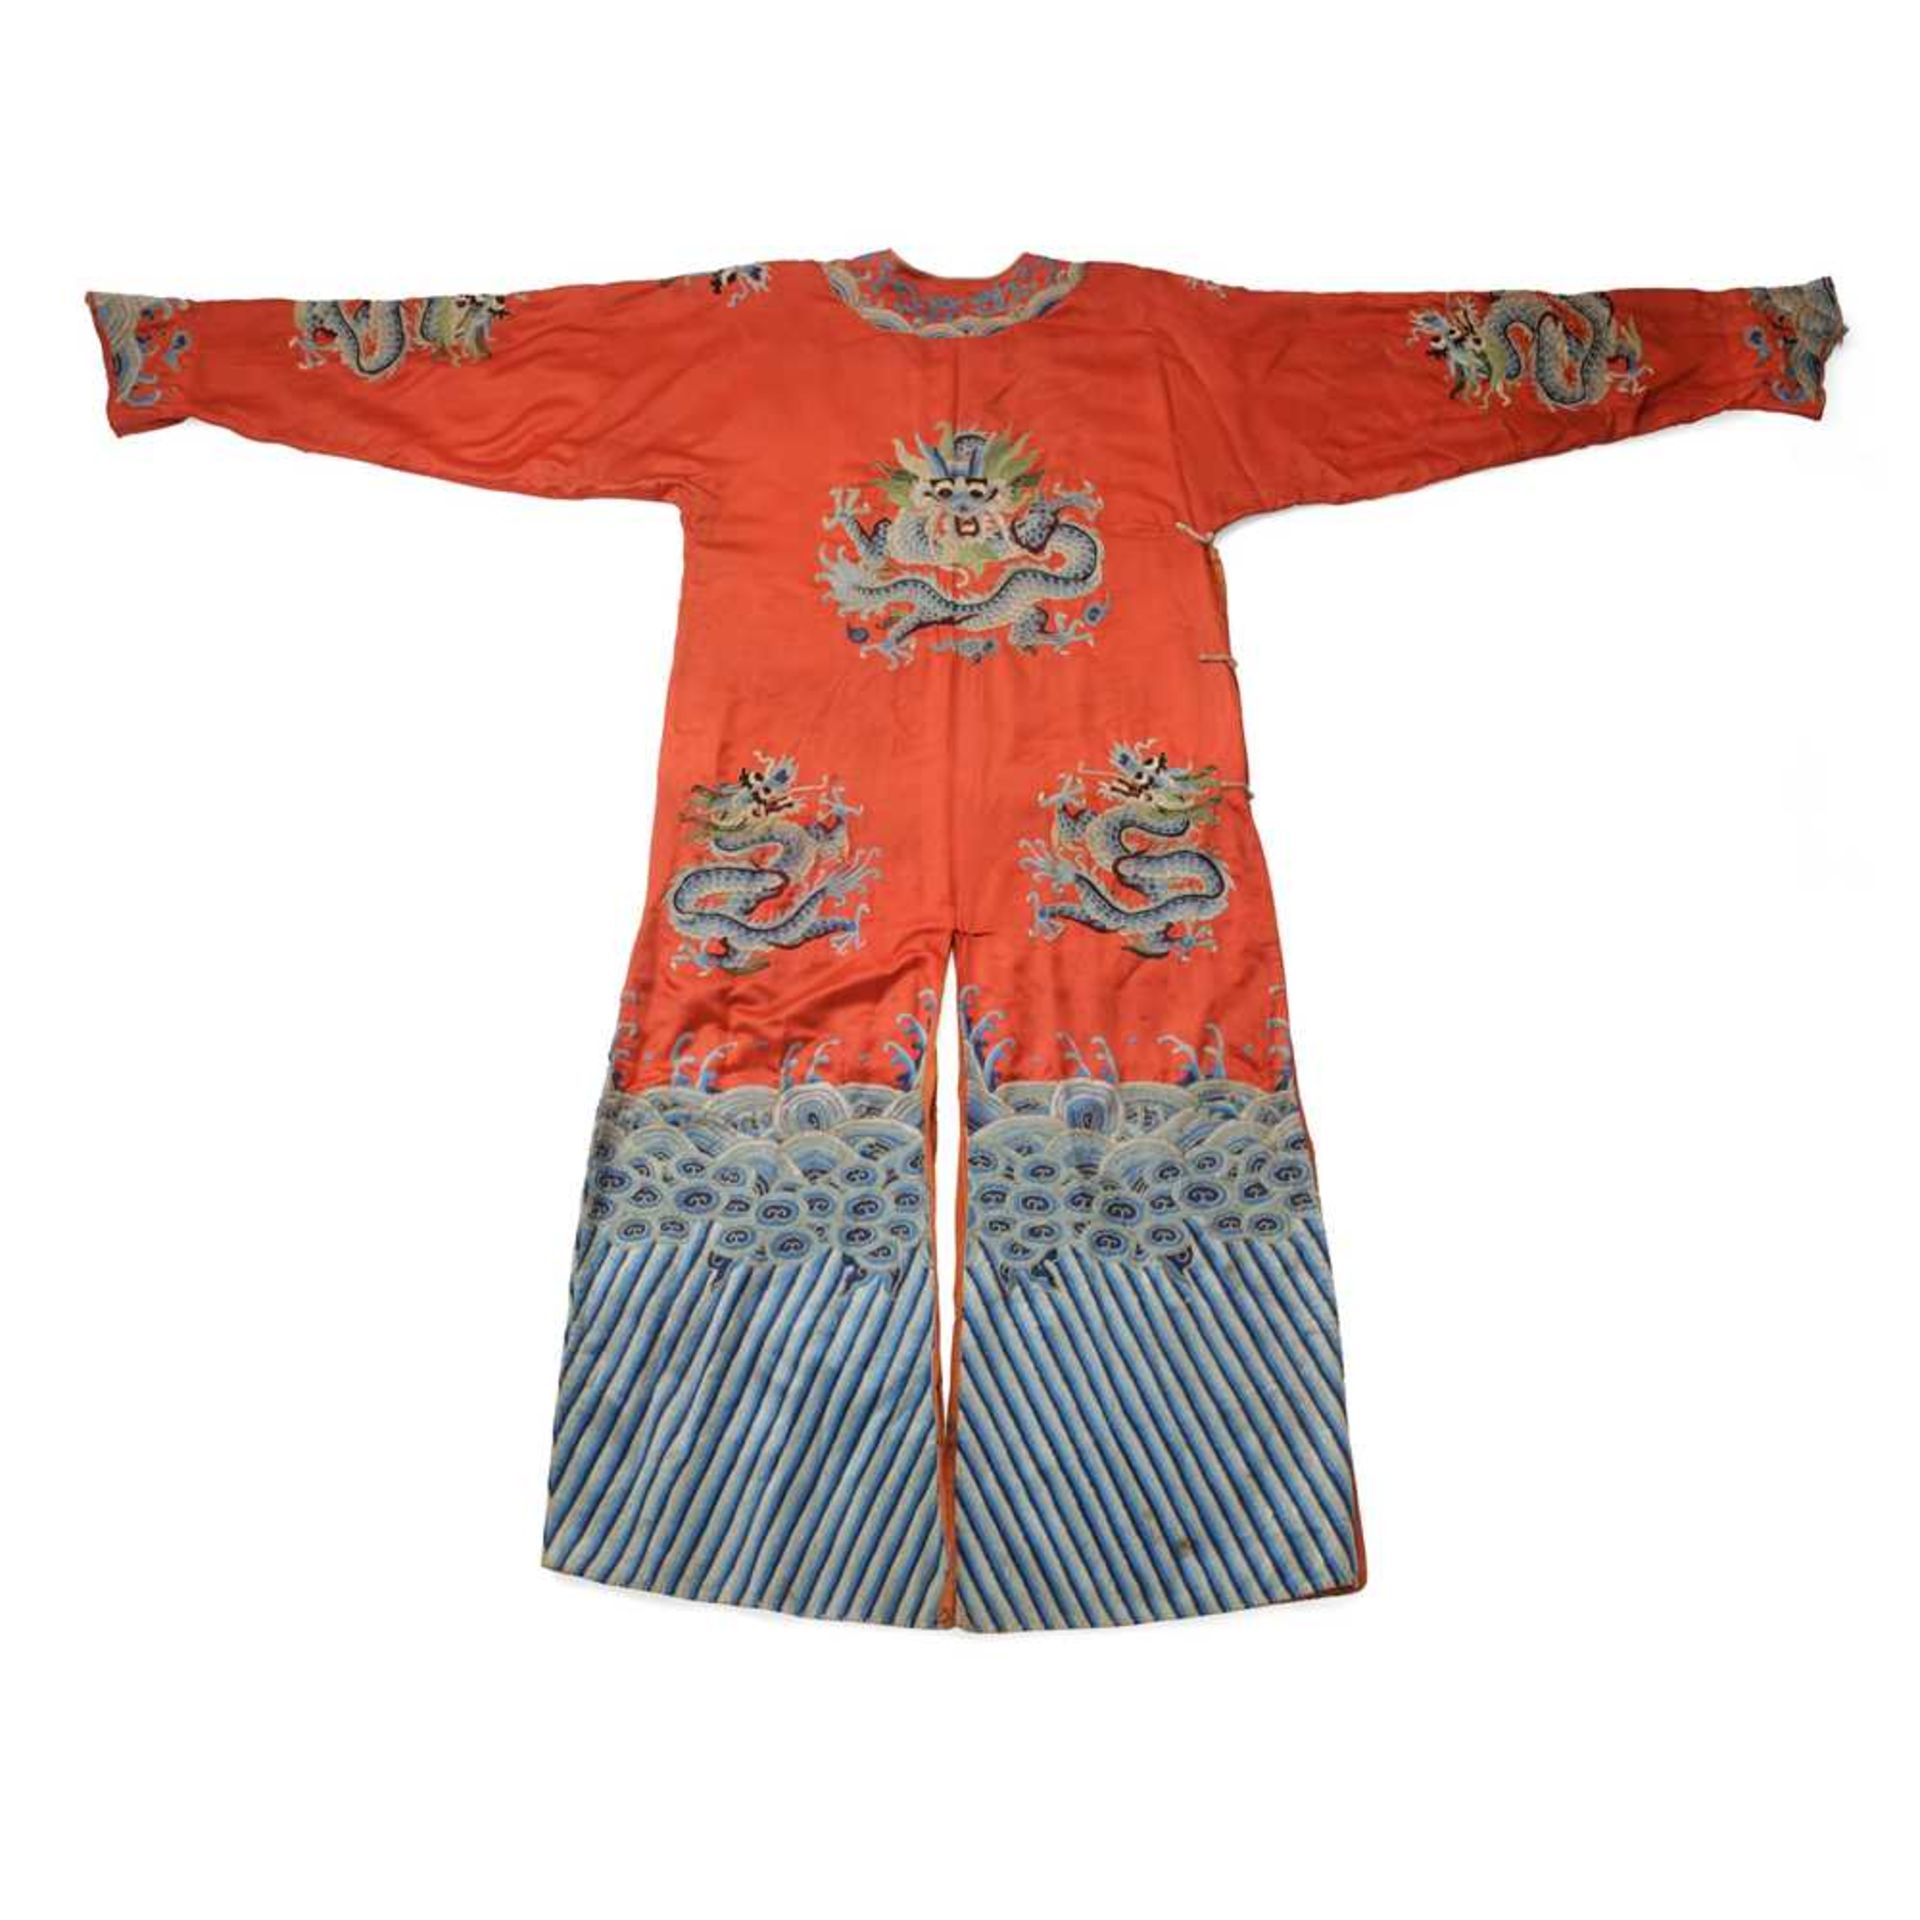 RED GROUND SILK EMBROIDERED 'DRAGON' ROBE 19TH-20TH CENTURY